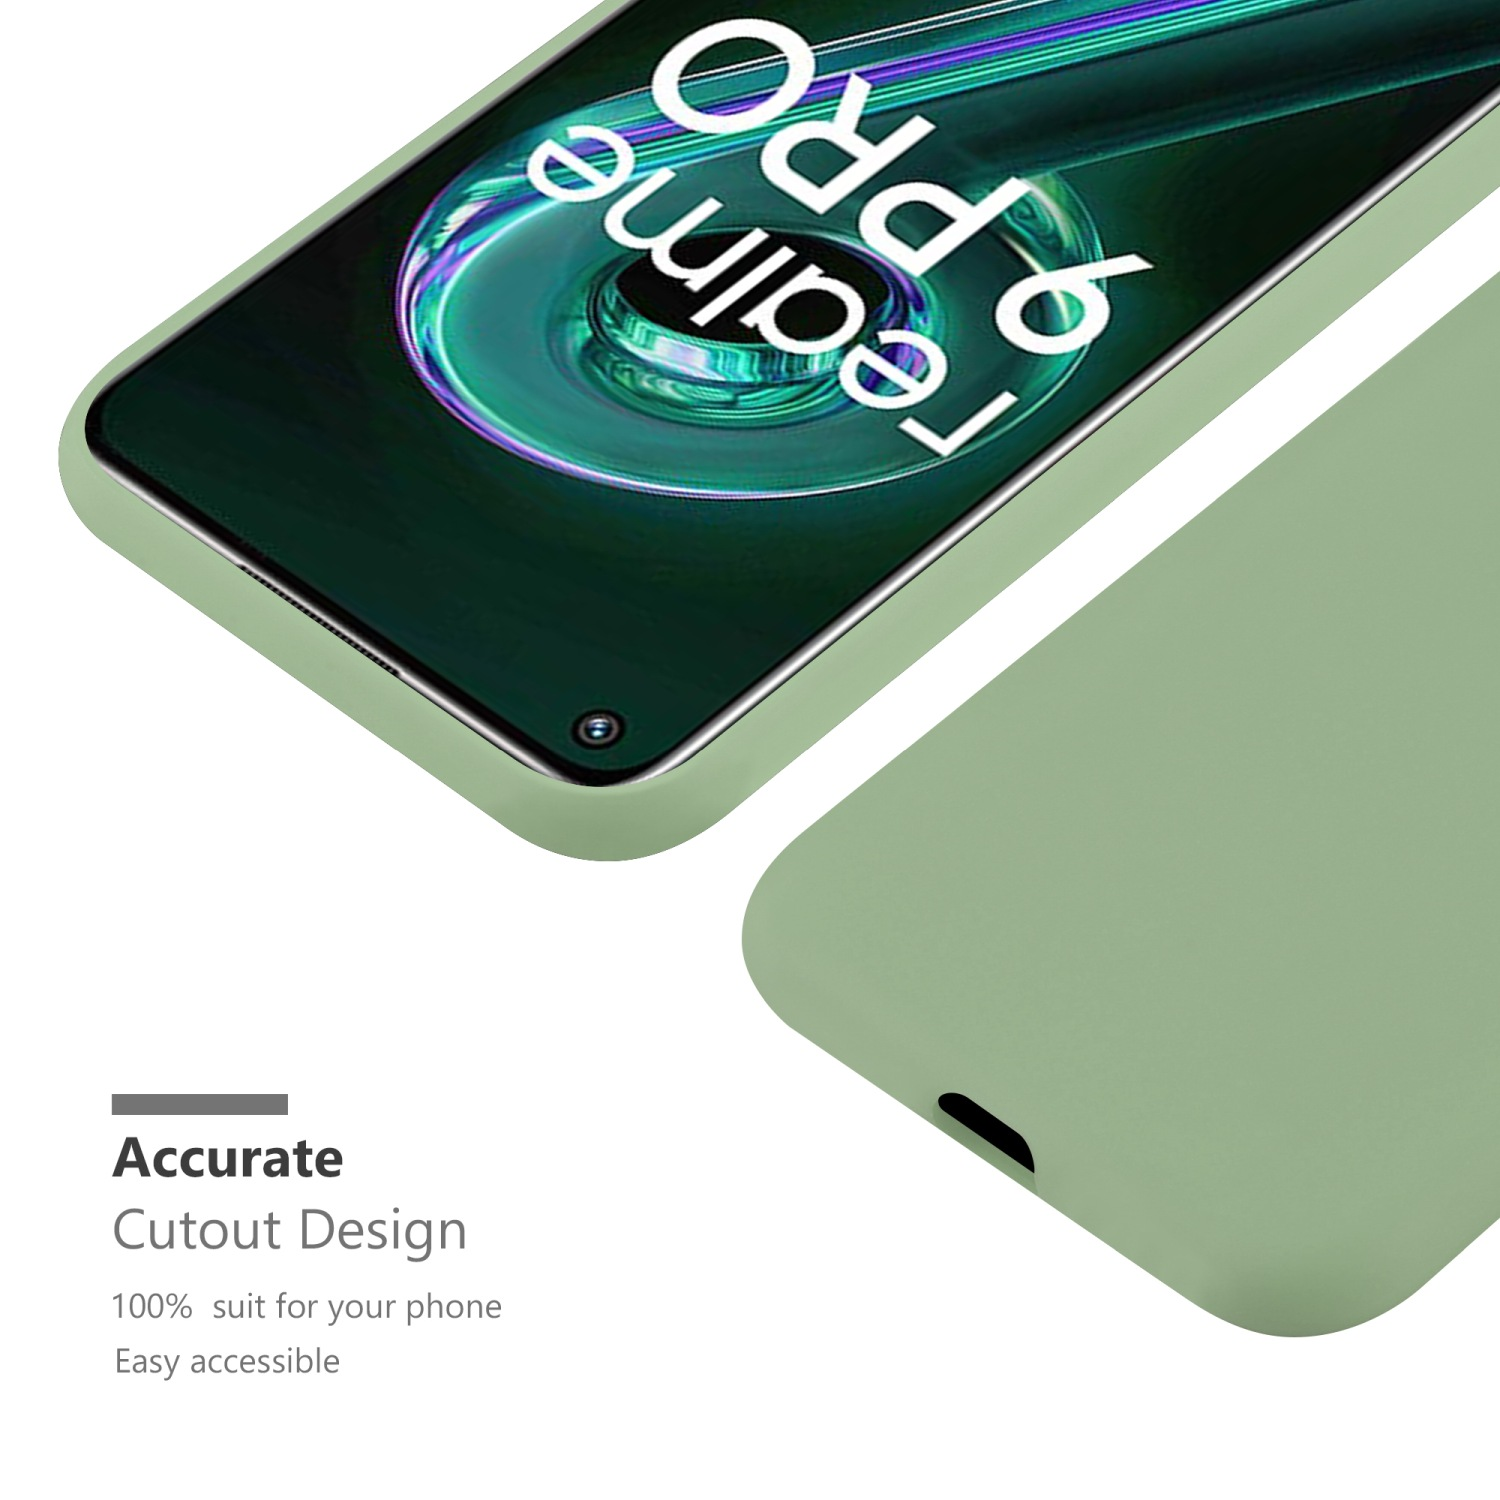 OnePlus TPU 9 / GRÜN Nord / / Candy / 5G, 2 Style, 9 5G Hülle Realme, LITE PRO V25 CANDY CE Backcover, CADORABO Q5 im PASTELL